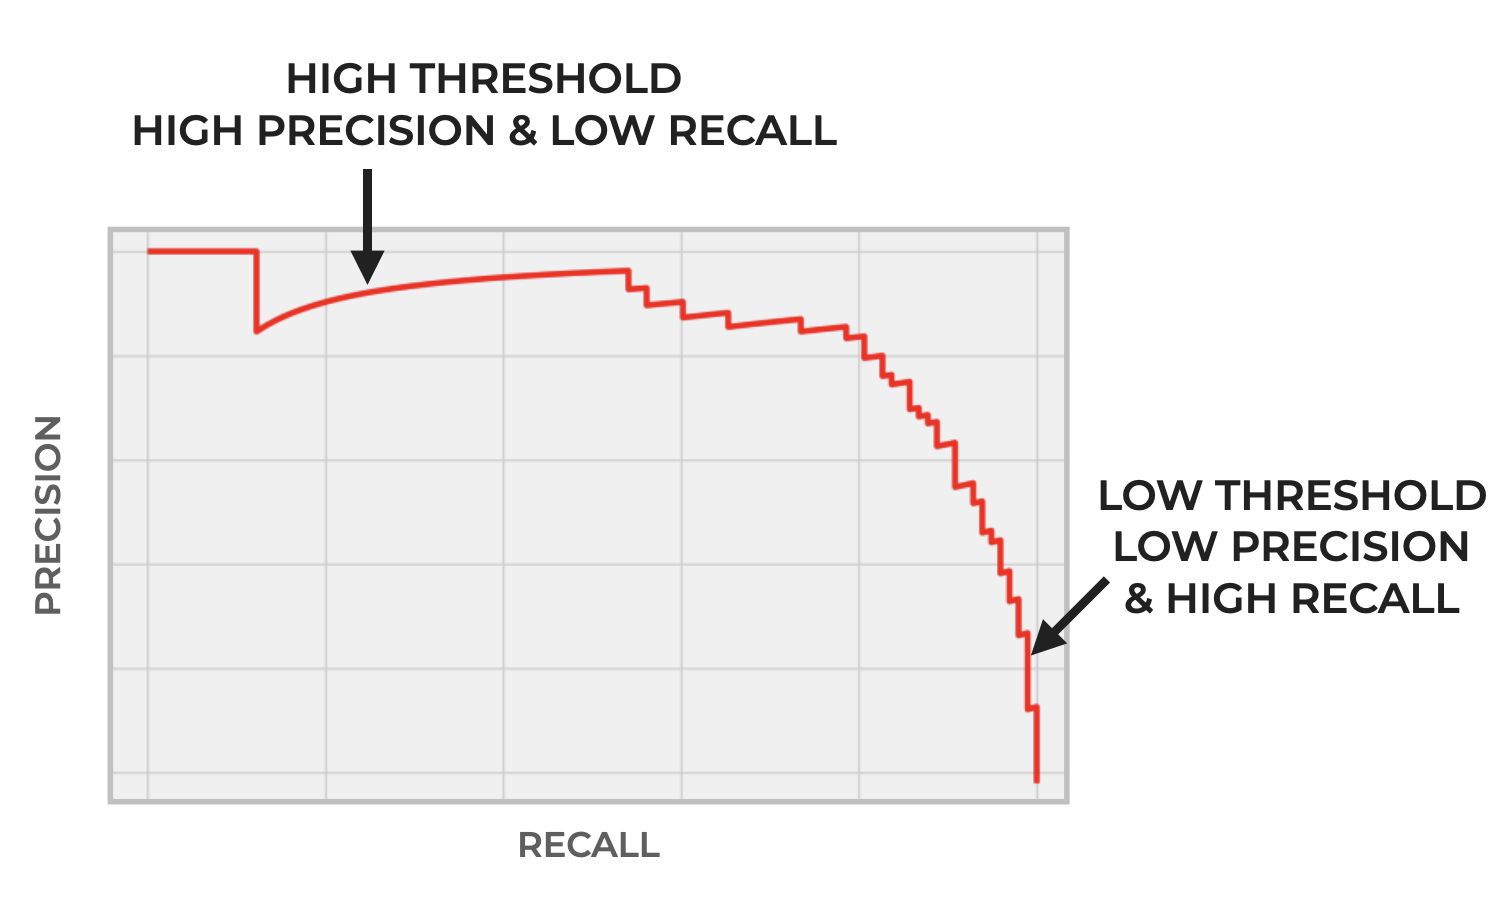 An image that shows how precision and recall change as we change the classification threshold.